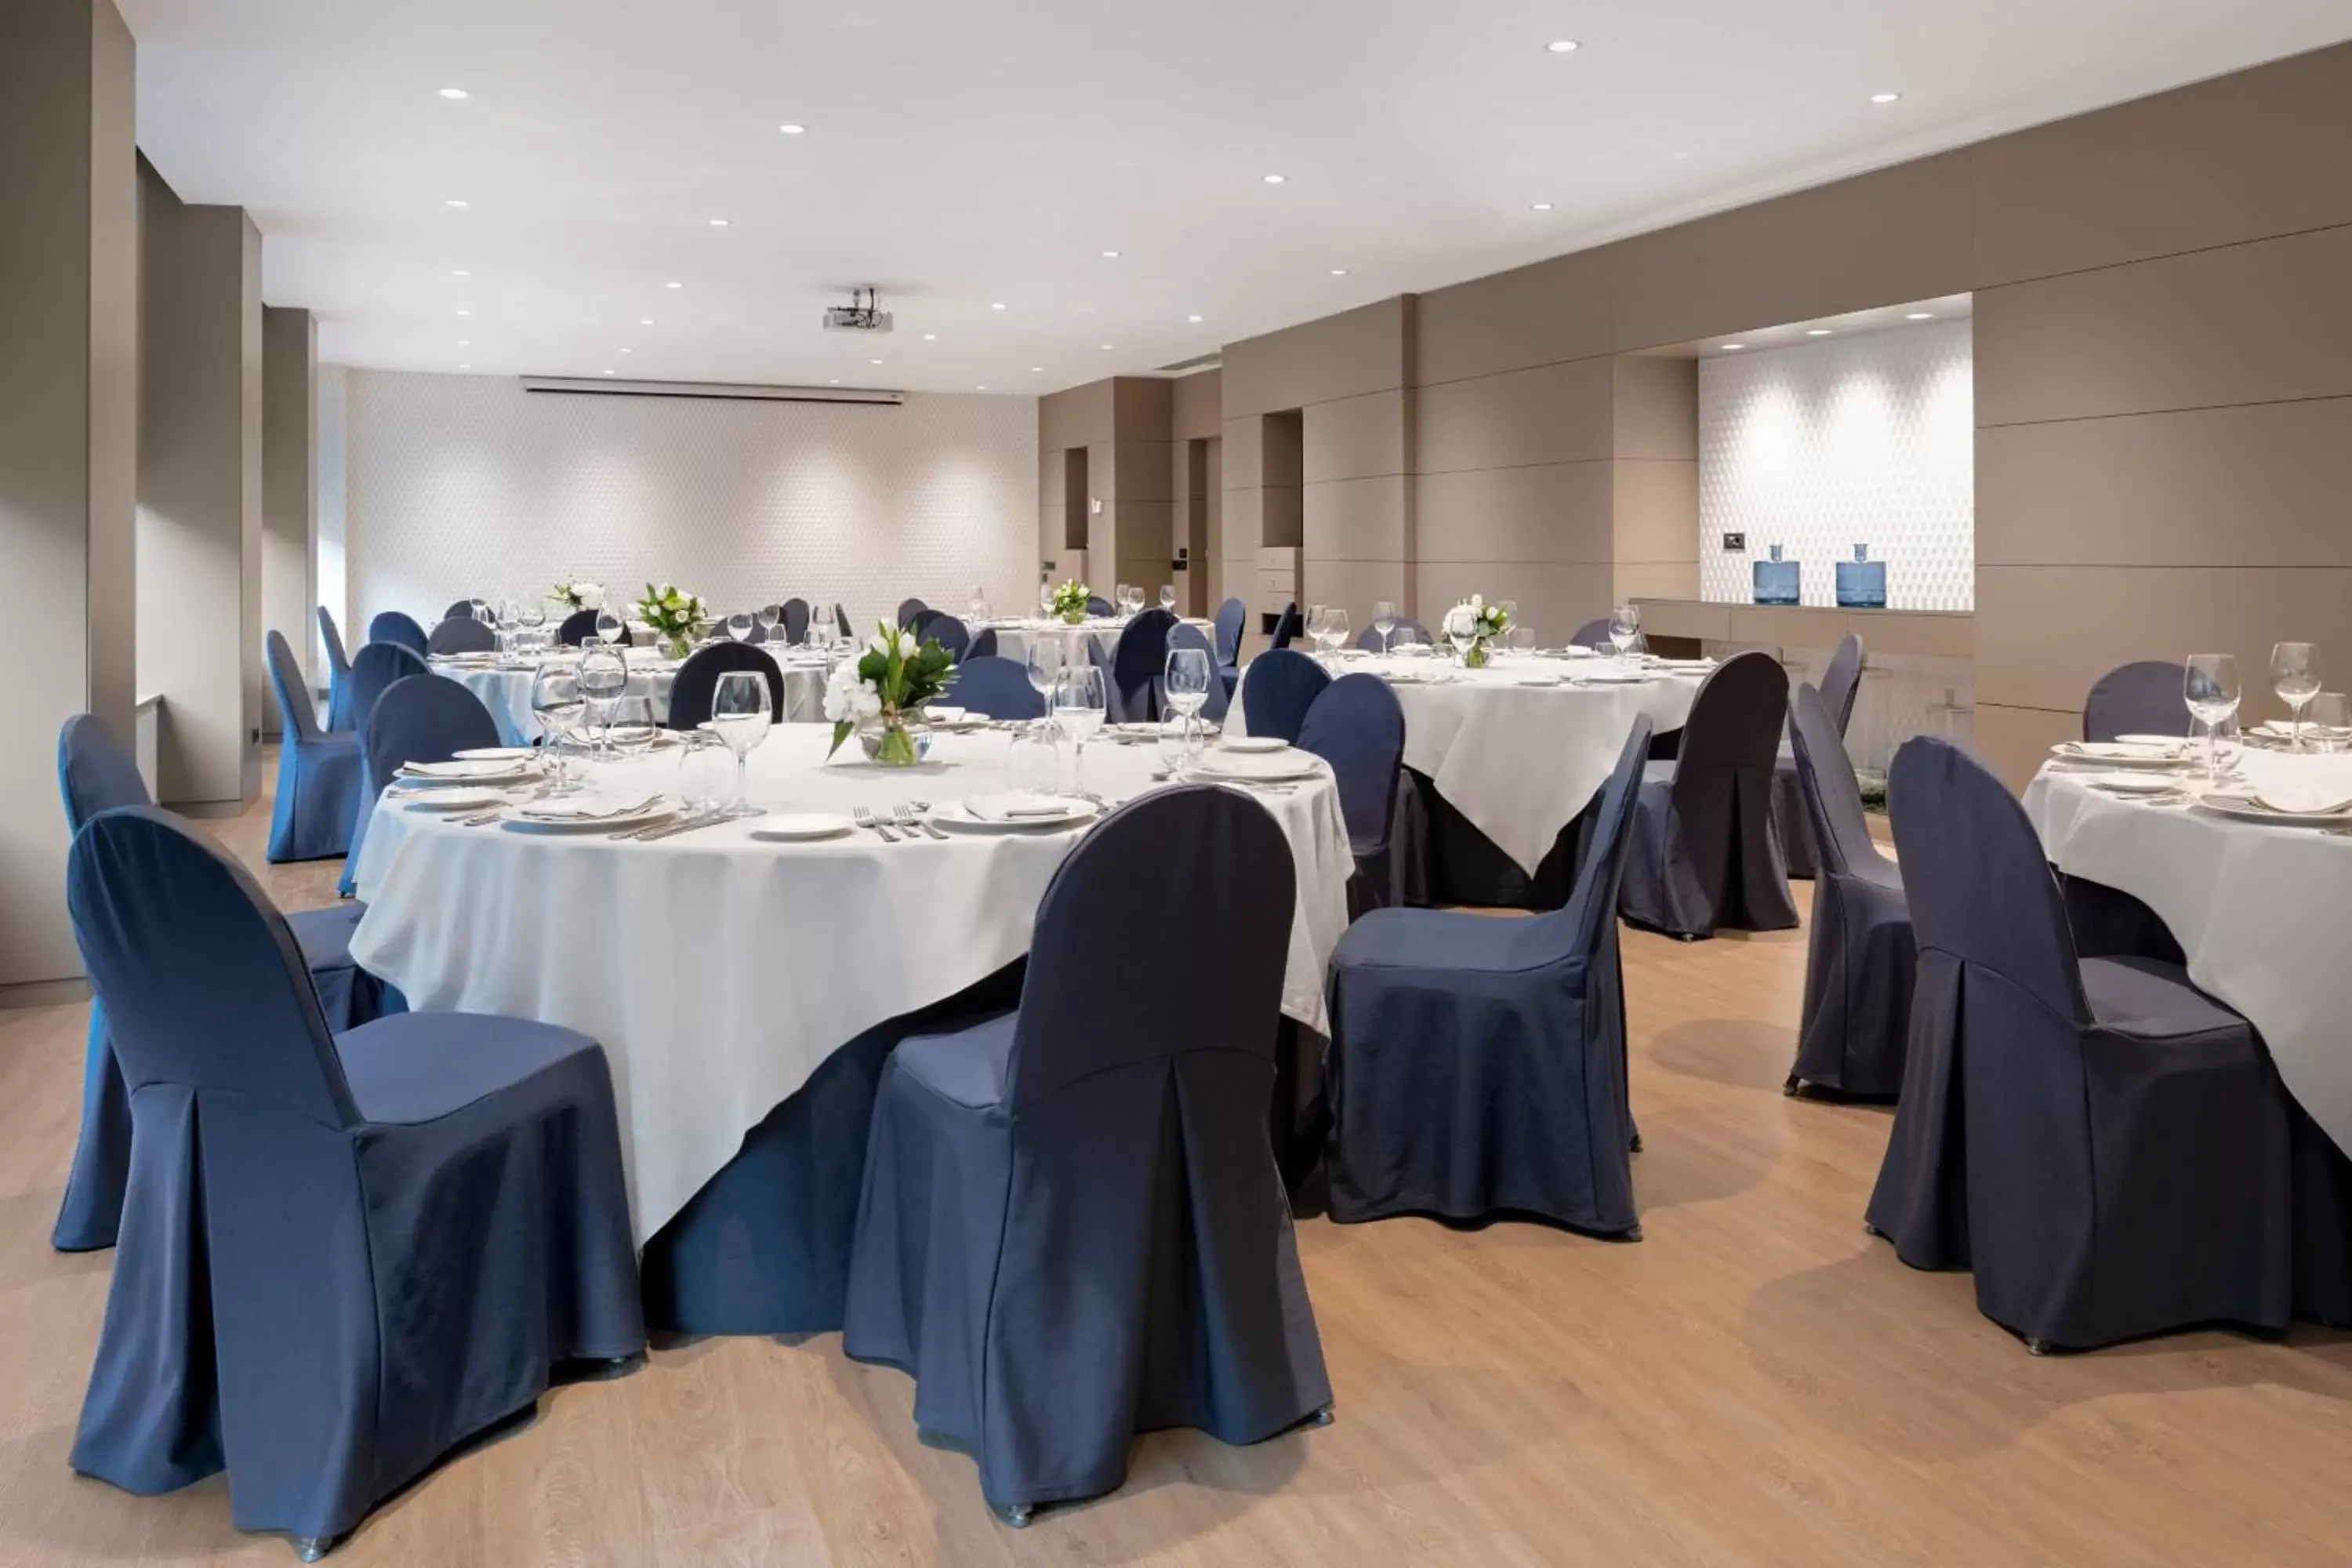 Meeting/conference room, Banquet Facilities in AC Hotel La Rioja by Marriott